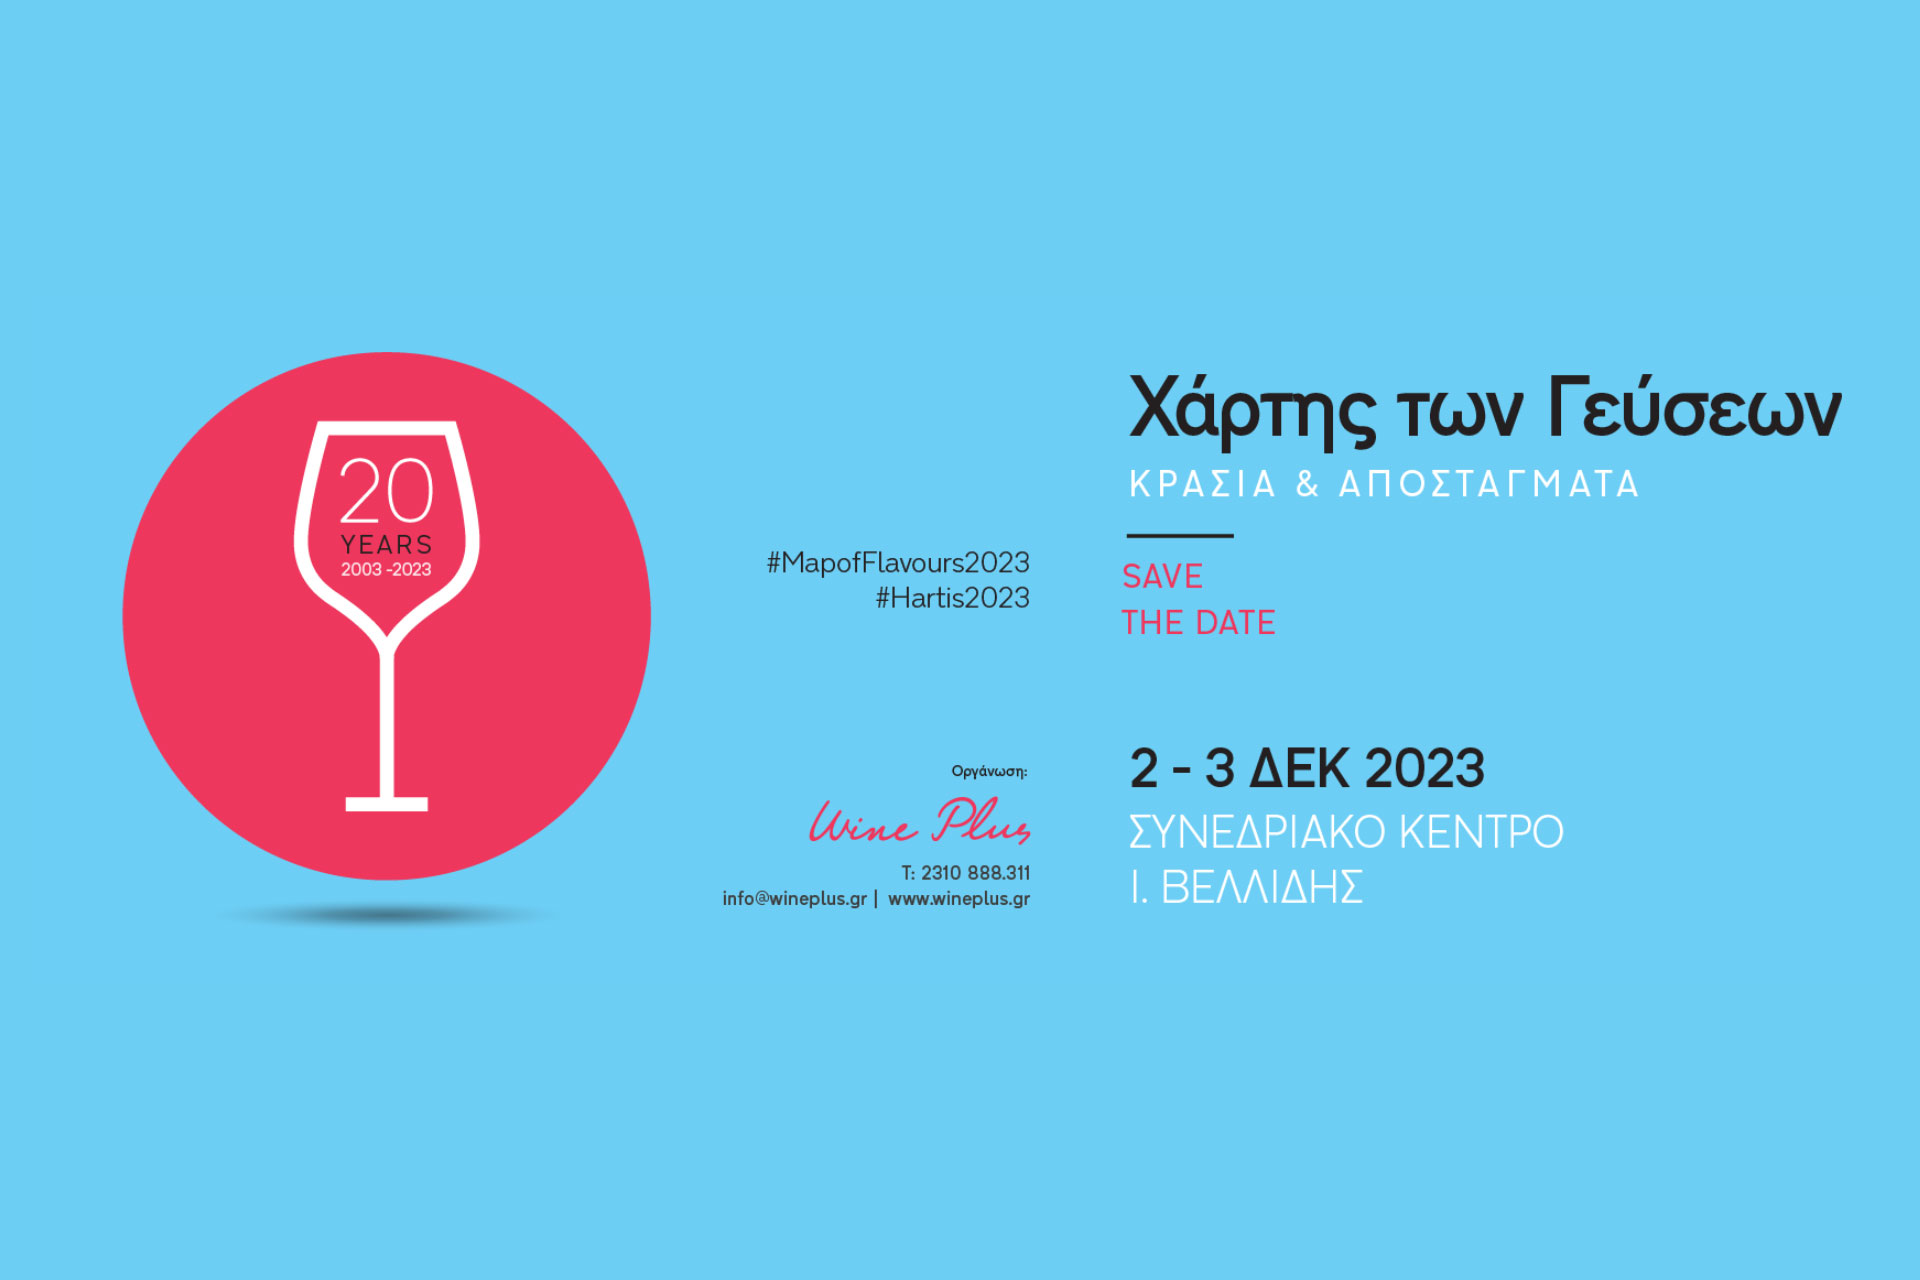 We participate in the exhibition Map of Flavours 2-3 December 2023